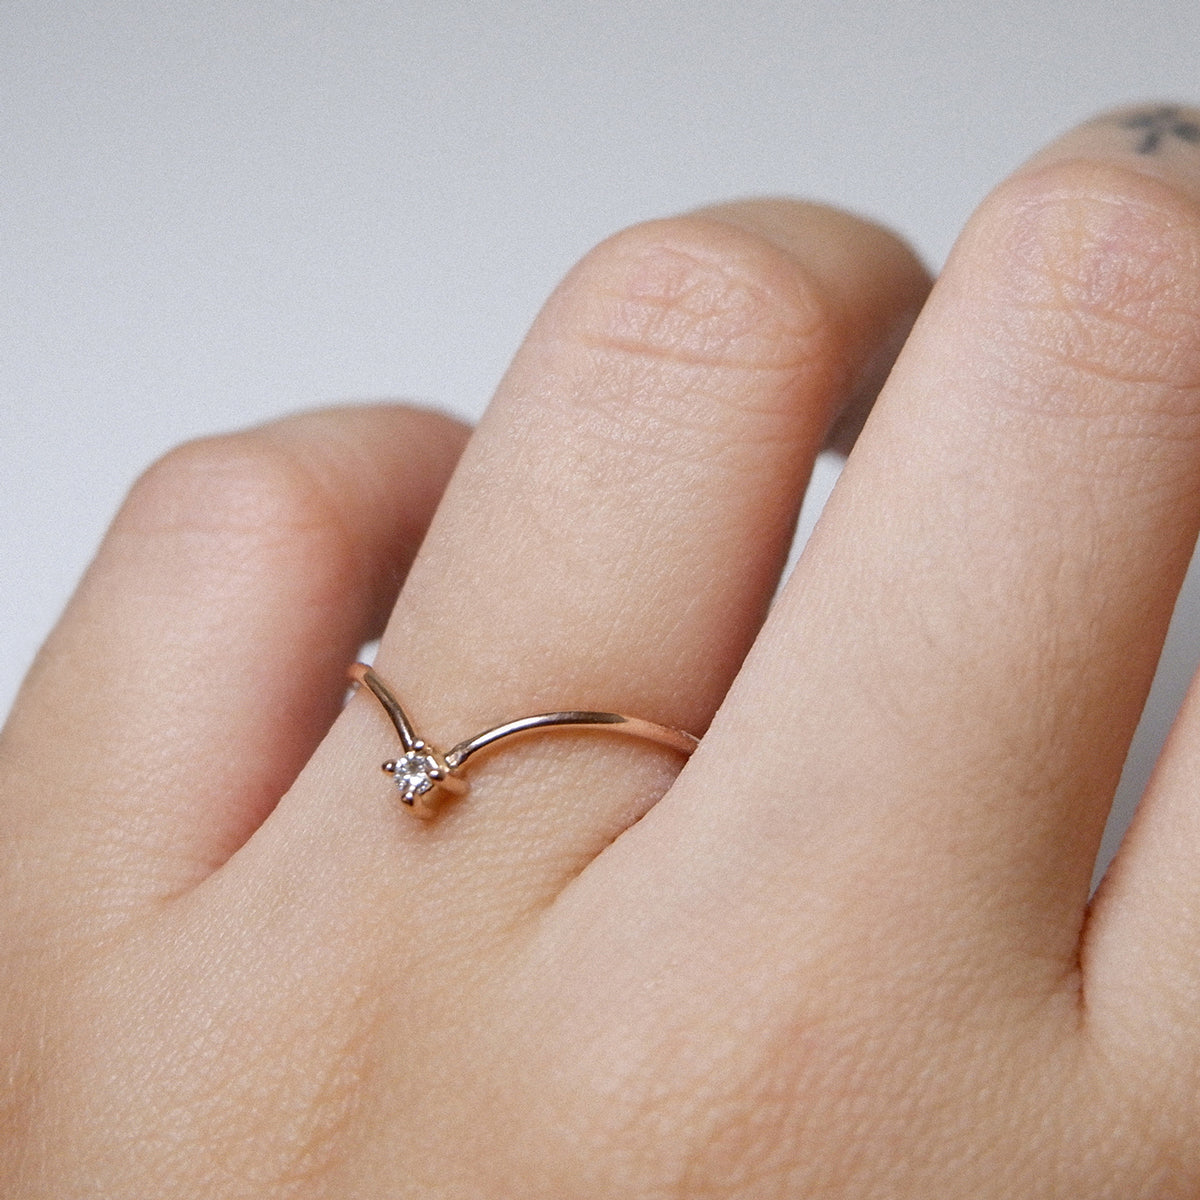 The Ava Diamond Ring in Solid Gold